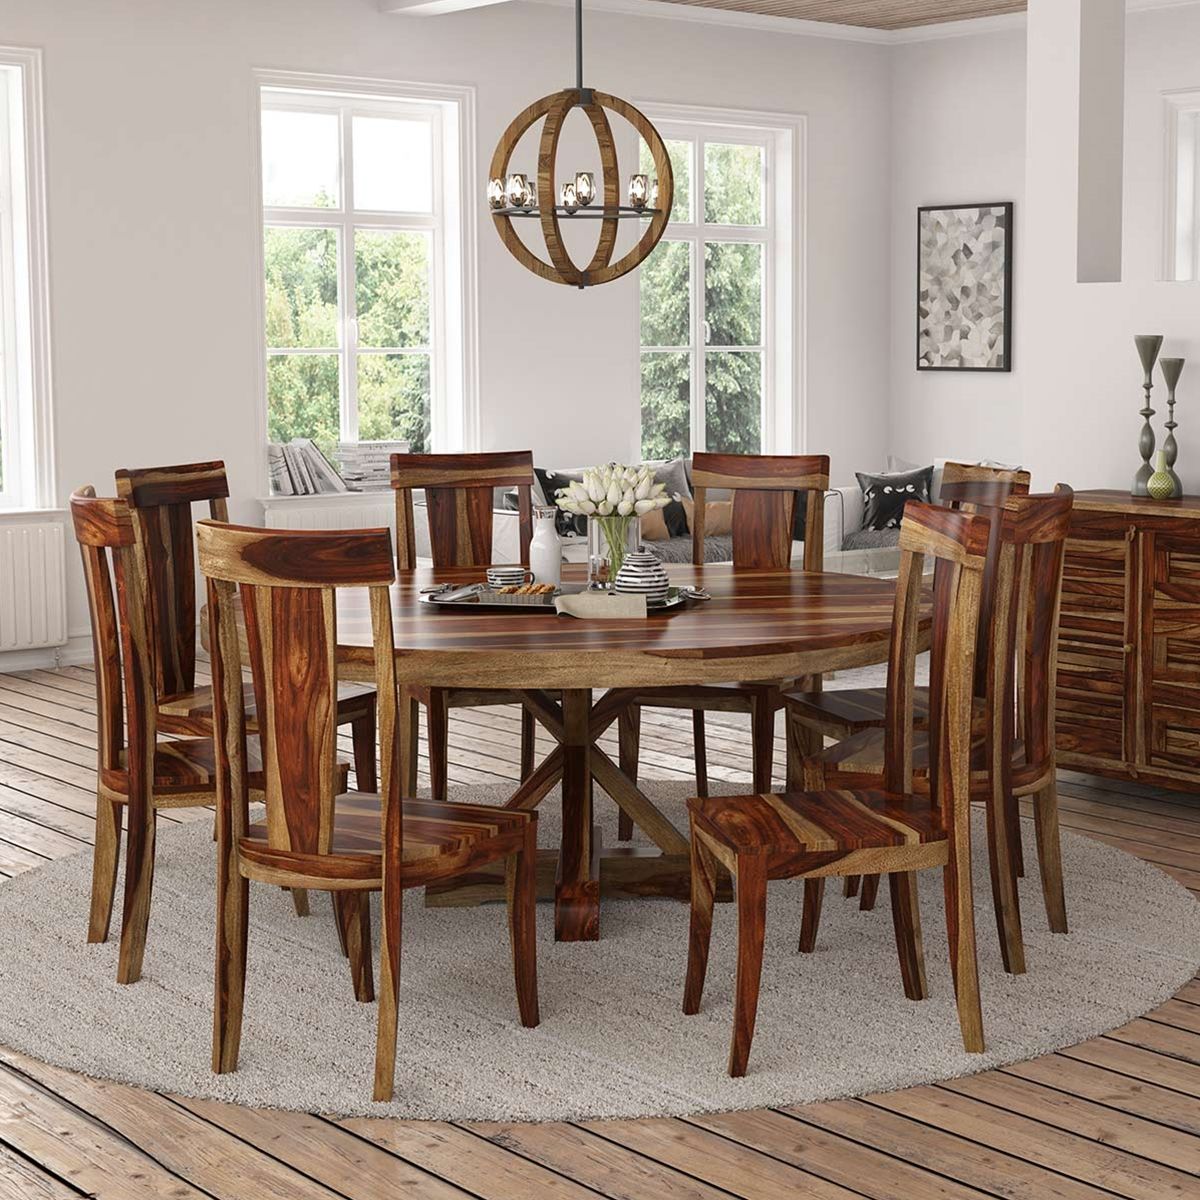 Bedford X Pedestal Rustic 72" Round Dining Table With 8 Chairs Set With Newest Bedfo 3 Piece Dining Sets (View 2 of 20)